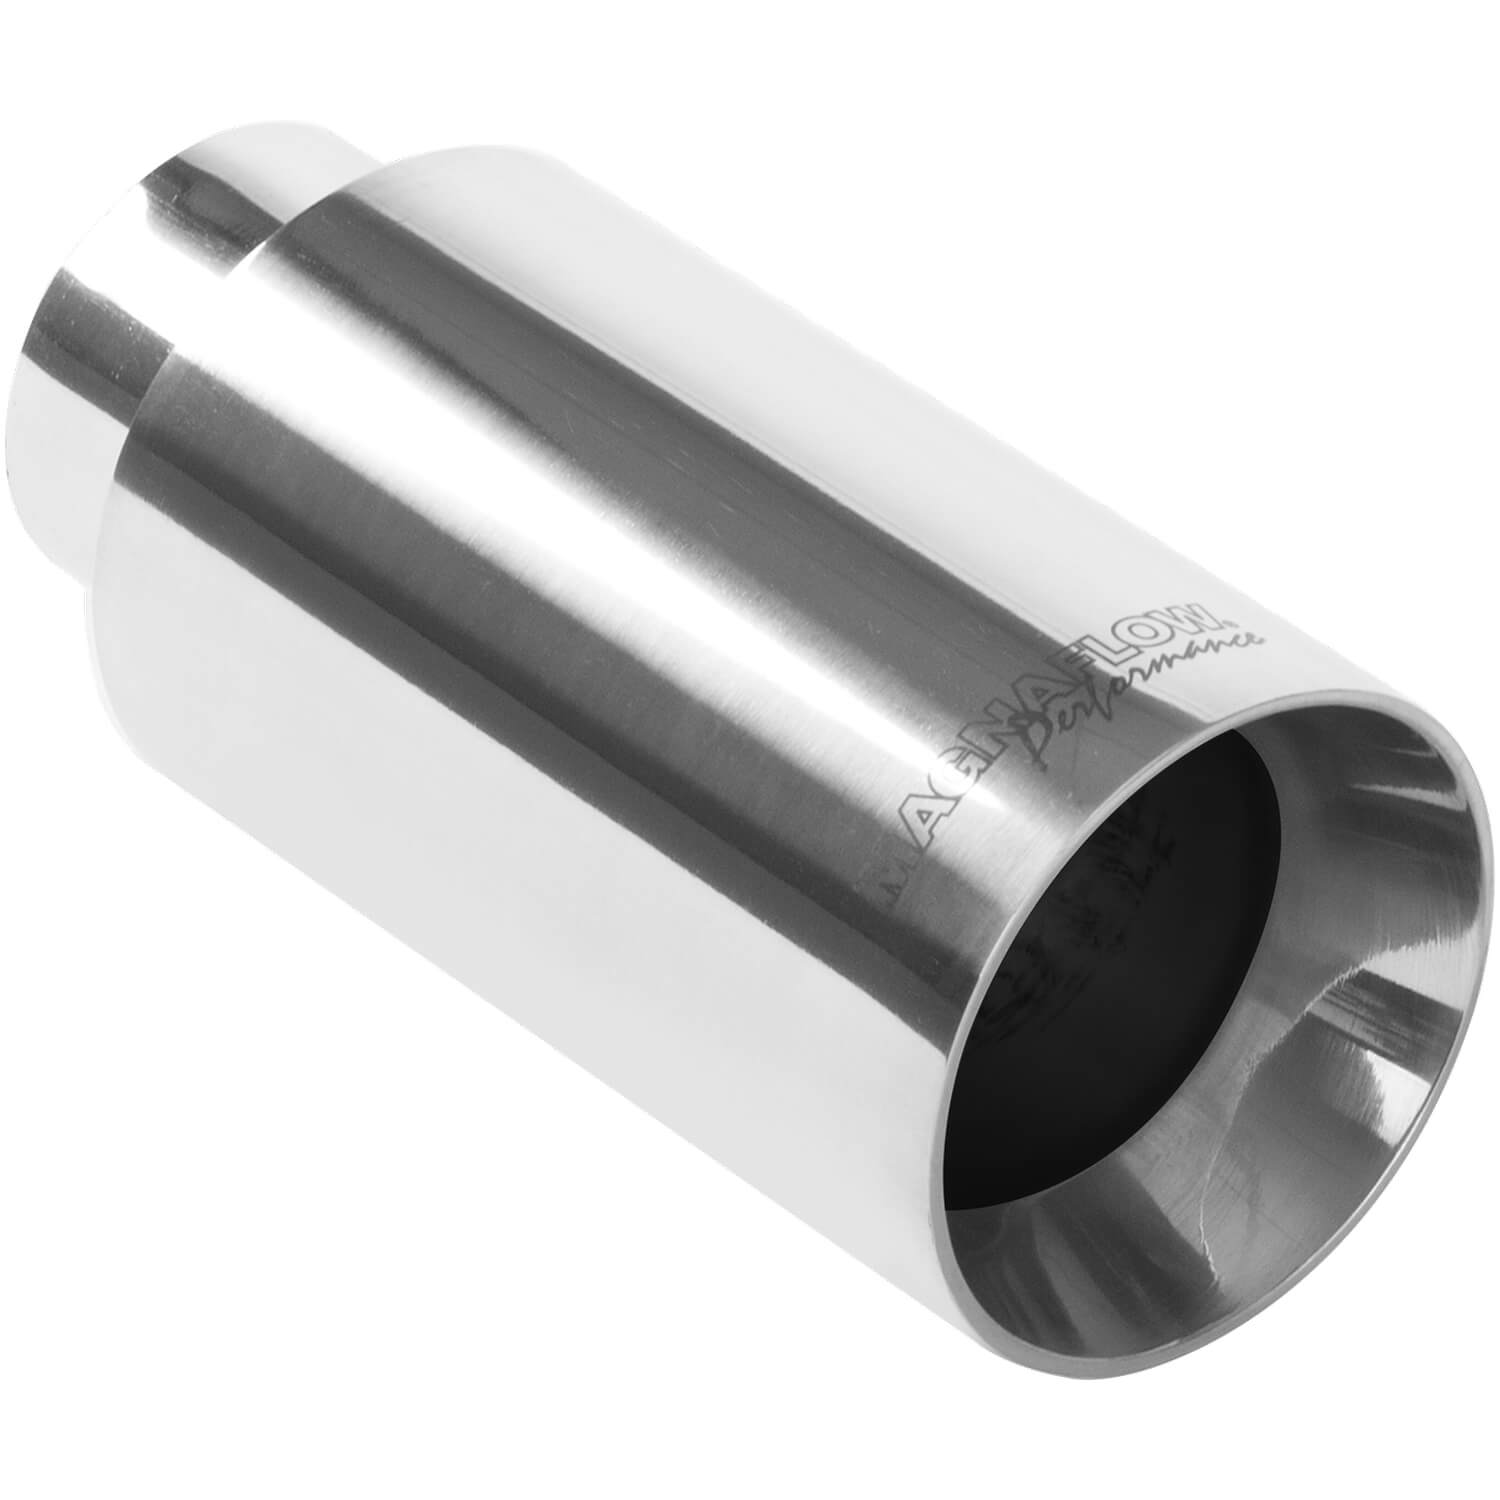 Polished Stainless Steel Weld-On Single Exhaust Tip Inlet